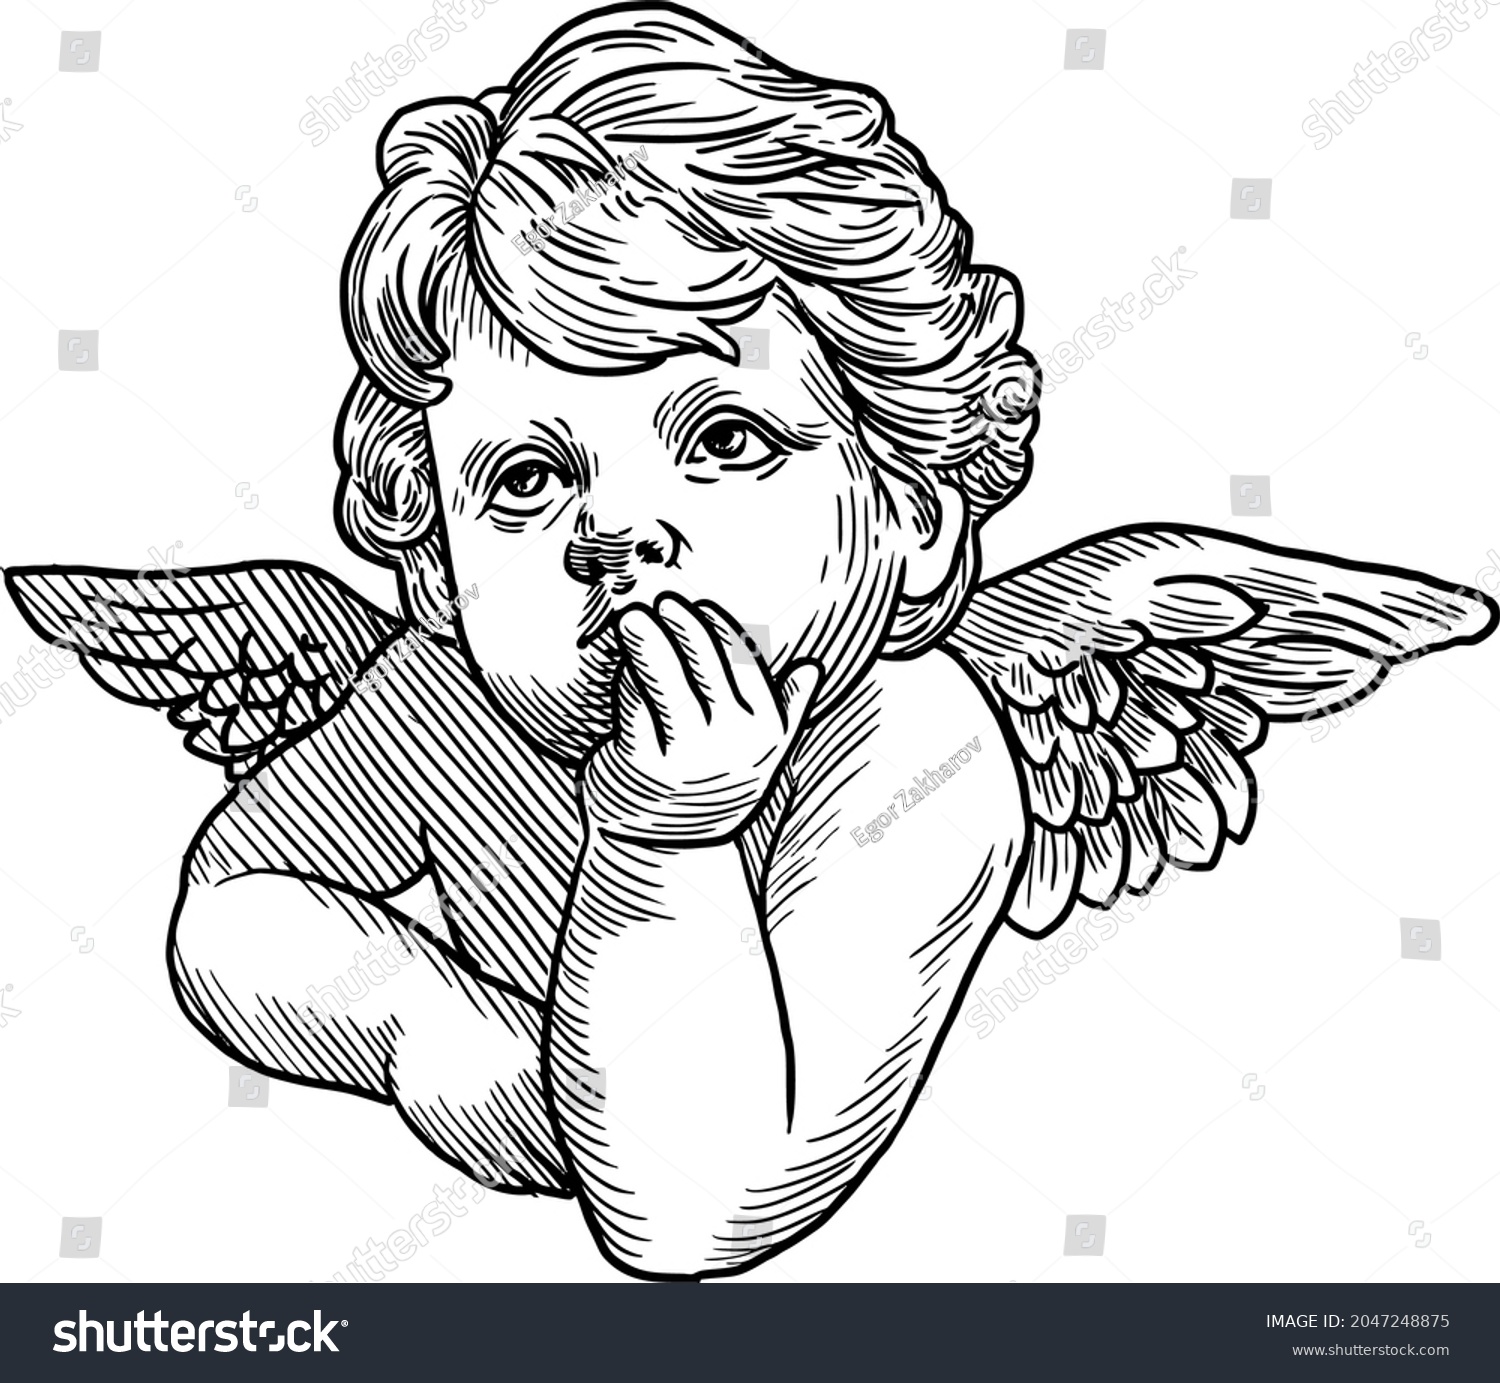 SVG of little angel cupid vector retro style engraving black and white line. sad angel eps svg